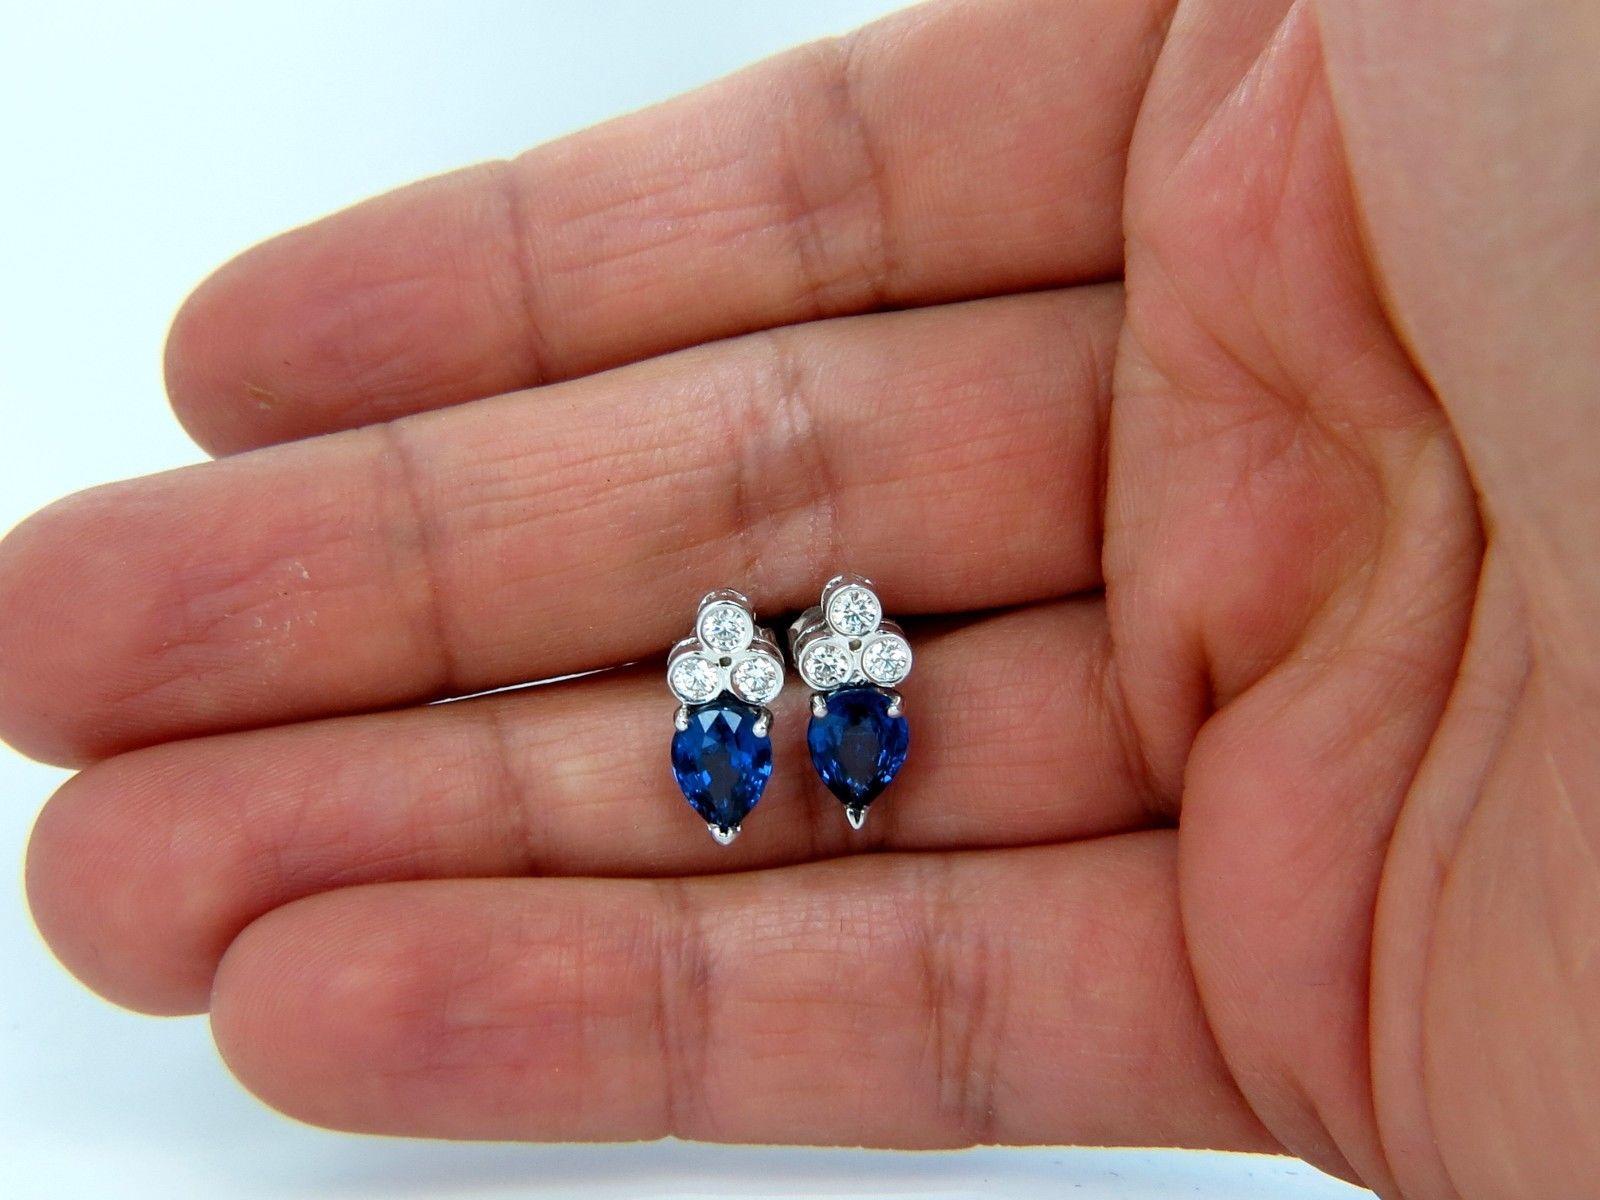 Natural sapphire & Diamonds classic Stud earrings

3.05ct total weight sapphires

pear, full cut brilliants.

sapphires: 7 X 6.3mm

Clean clarity & transparent.





.40ct. Round Brilliant full cut diamonds.

G-color Vs-2 clarity

Overall earrings